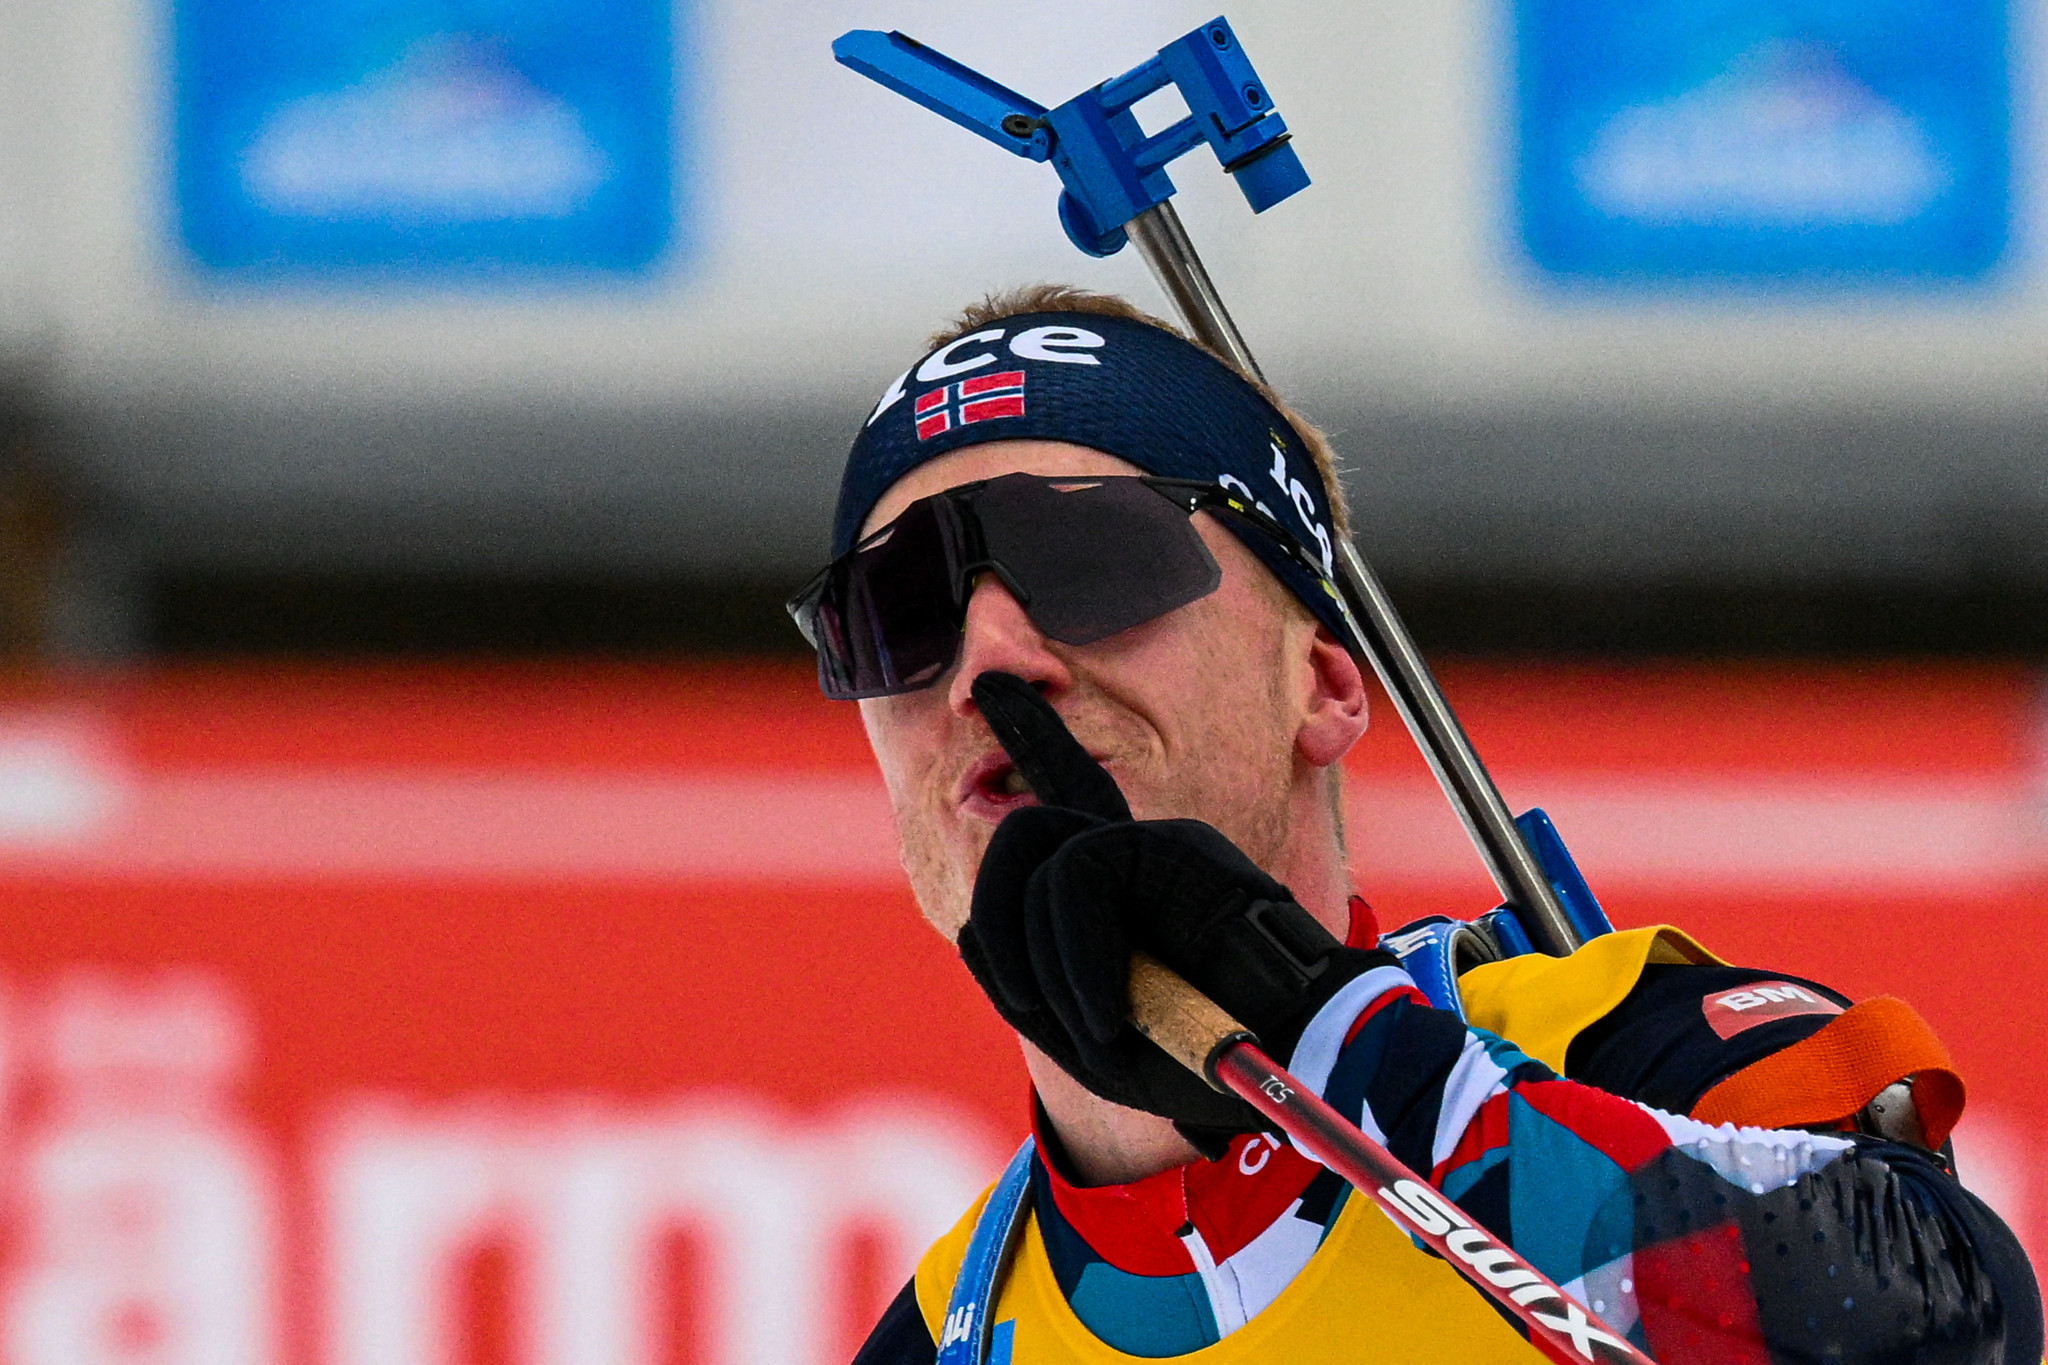 Bø continues perfect 2023 start with sixth Biathlon World Cup win in a row